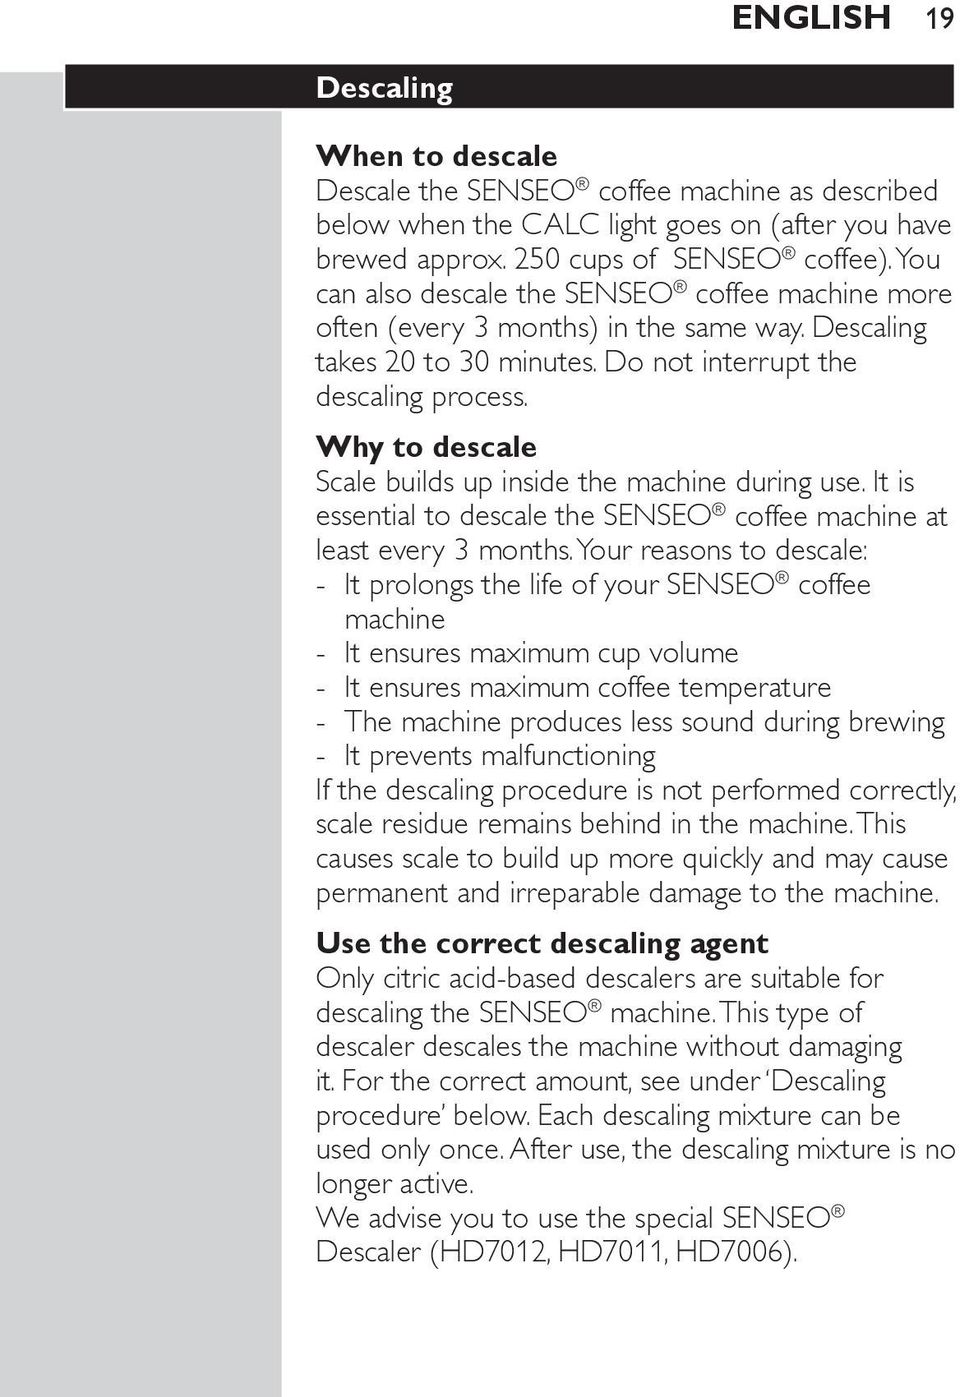 Why to descale Scale builds up inside the machine during use. It is essential to descale the SENSEO coffee machine at least every 3 months.